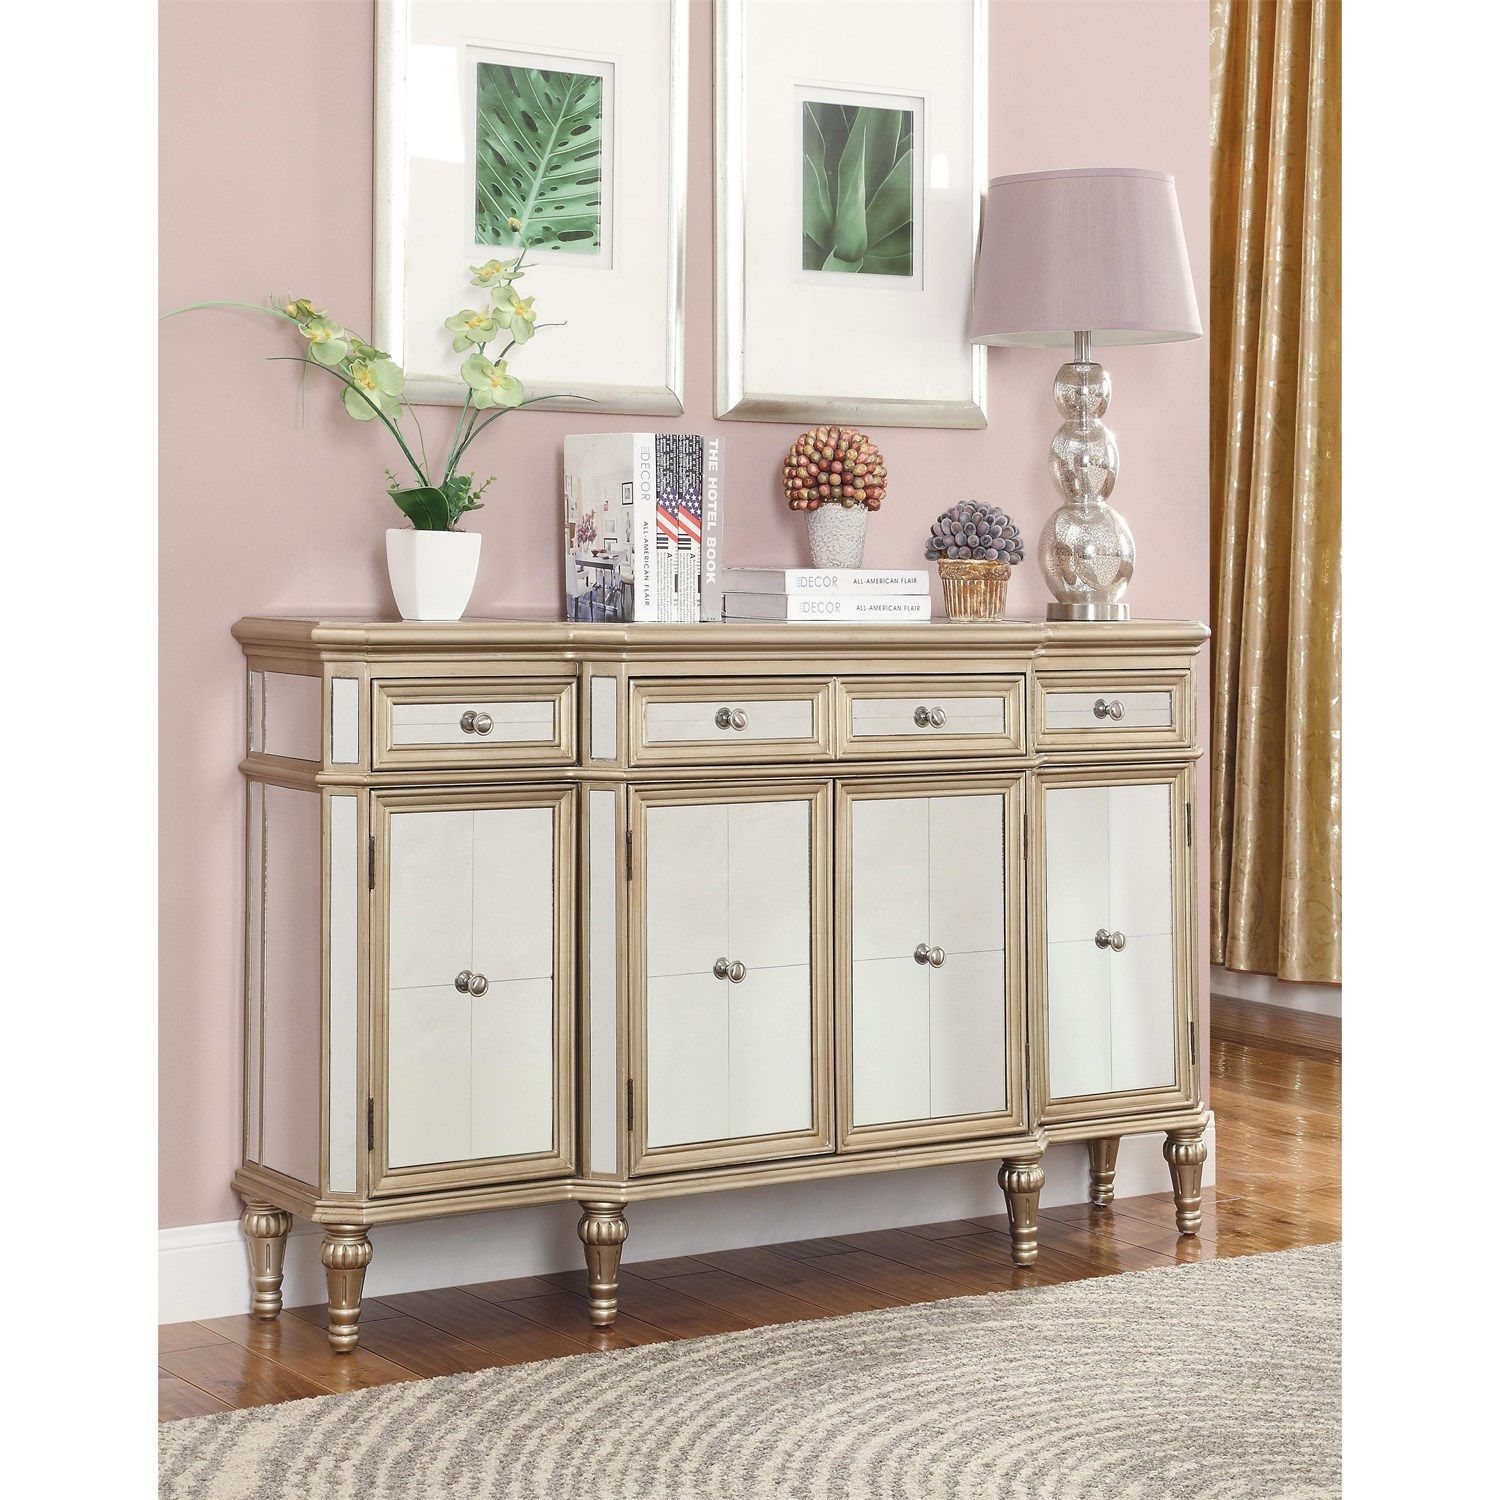 Coast To Coast 56326 60" Door Drawer Credenza In Estaline Intended For Raquette Sideboards (View 15 of 30)